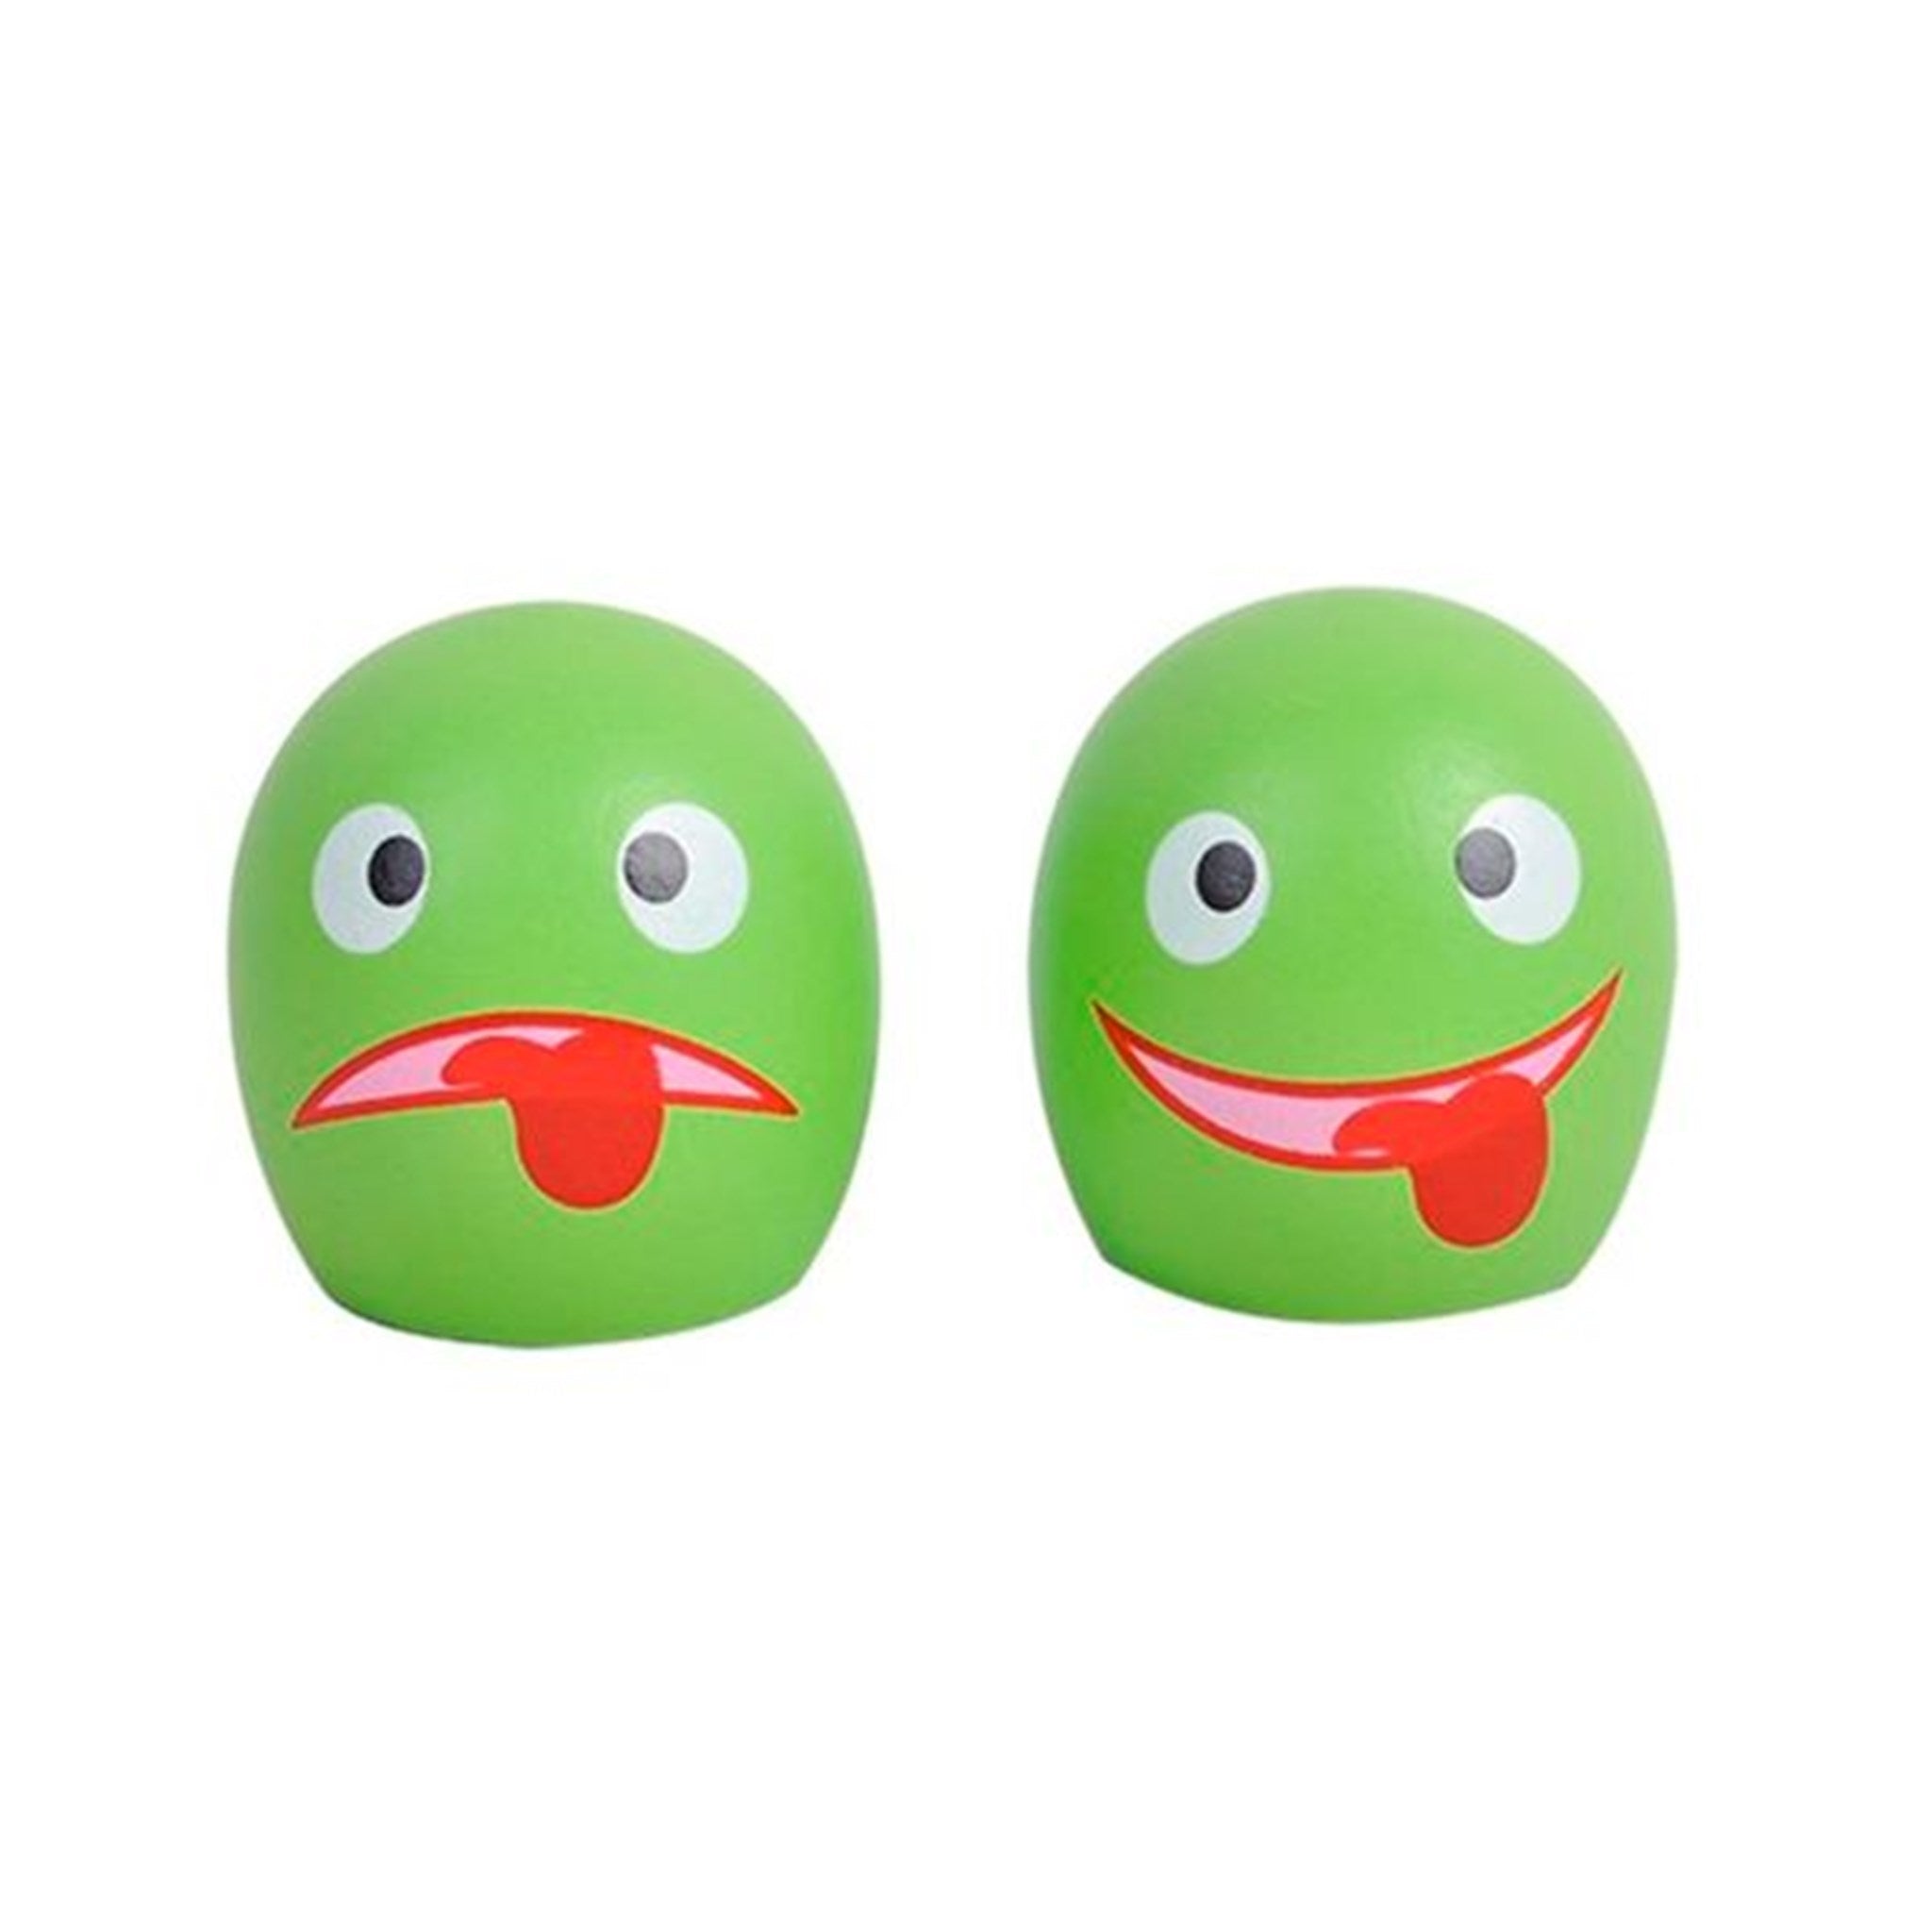 MaMaMeMo Cakes with Faces Green 2 pieces